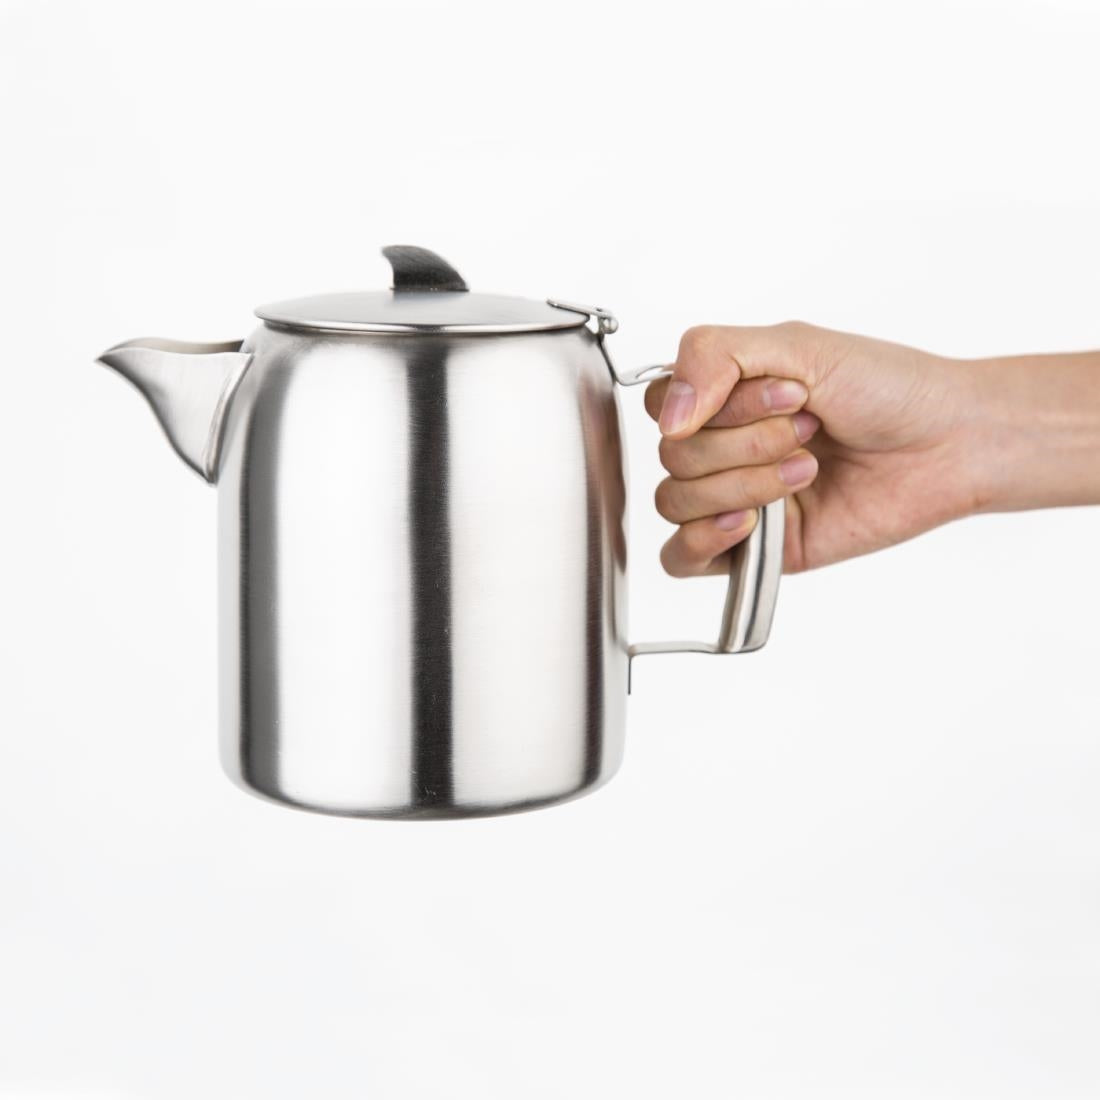 DP125 Olympia Airline Teapot Stainless Steel 1.6Ltr